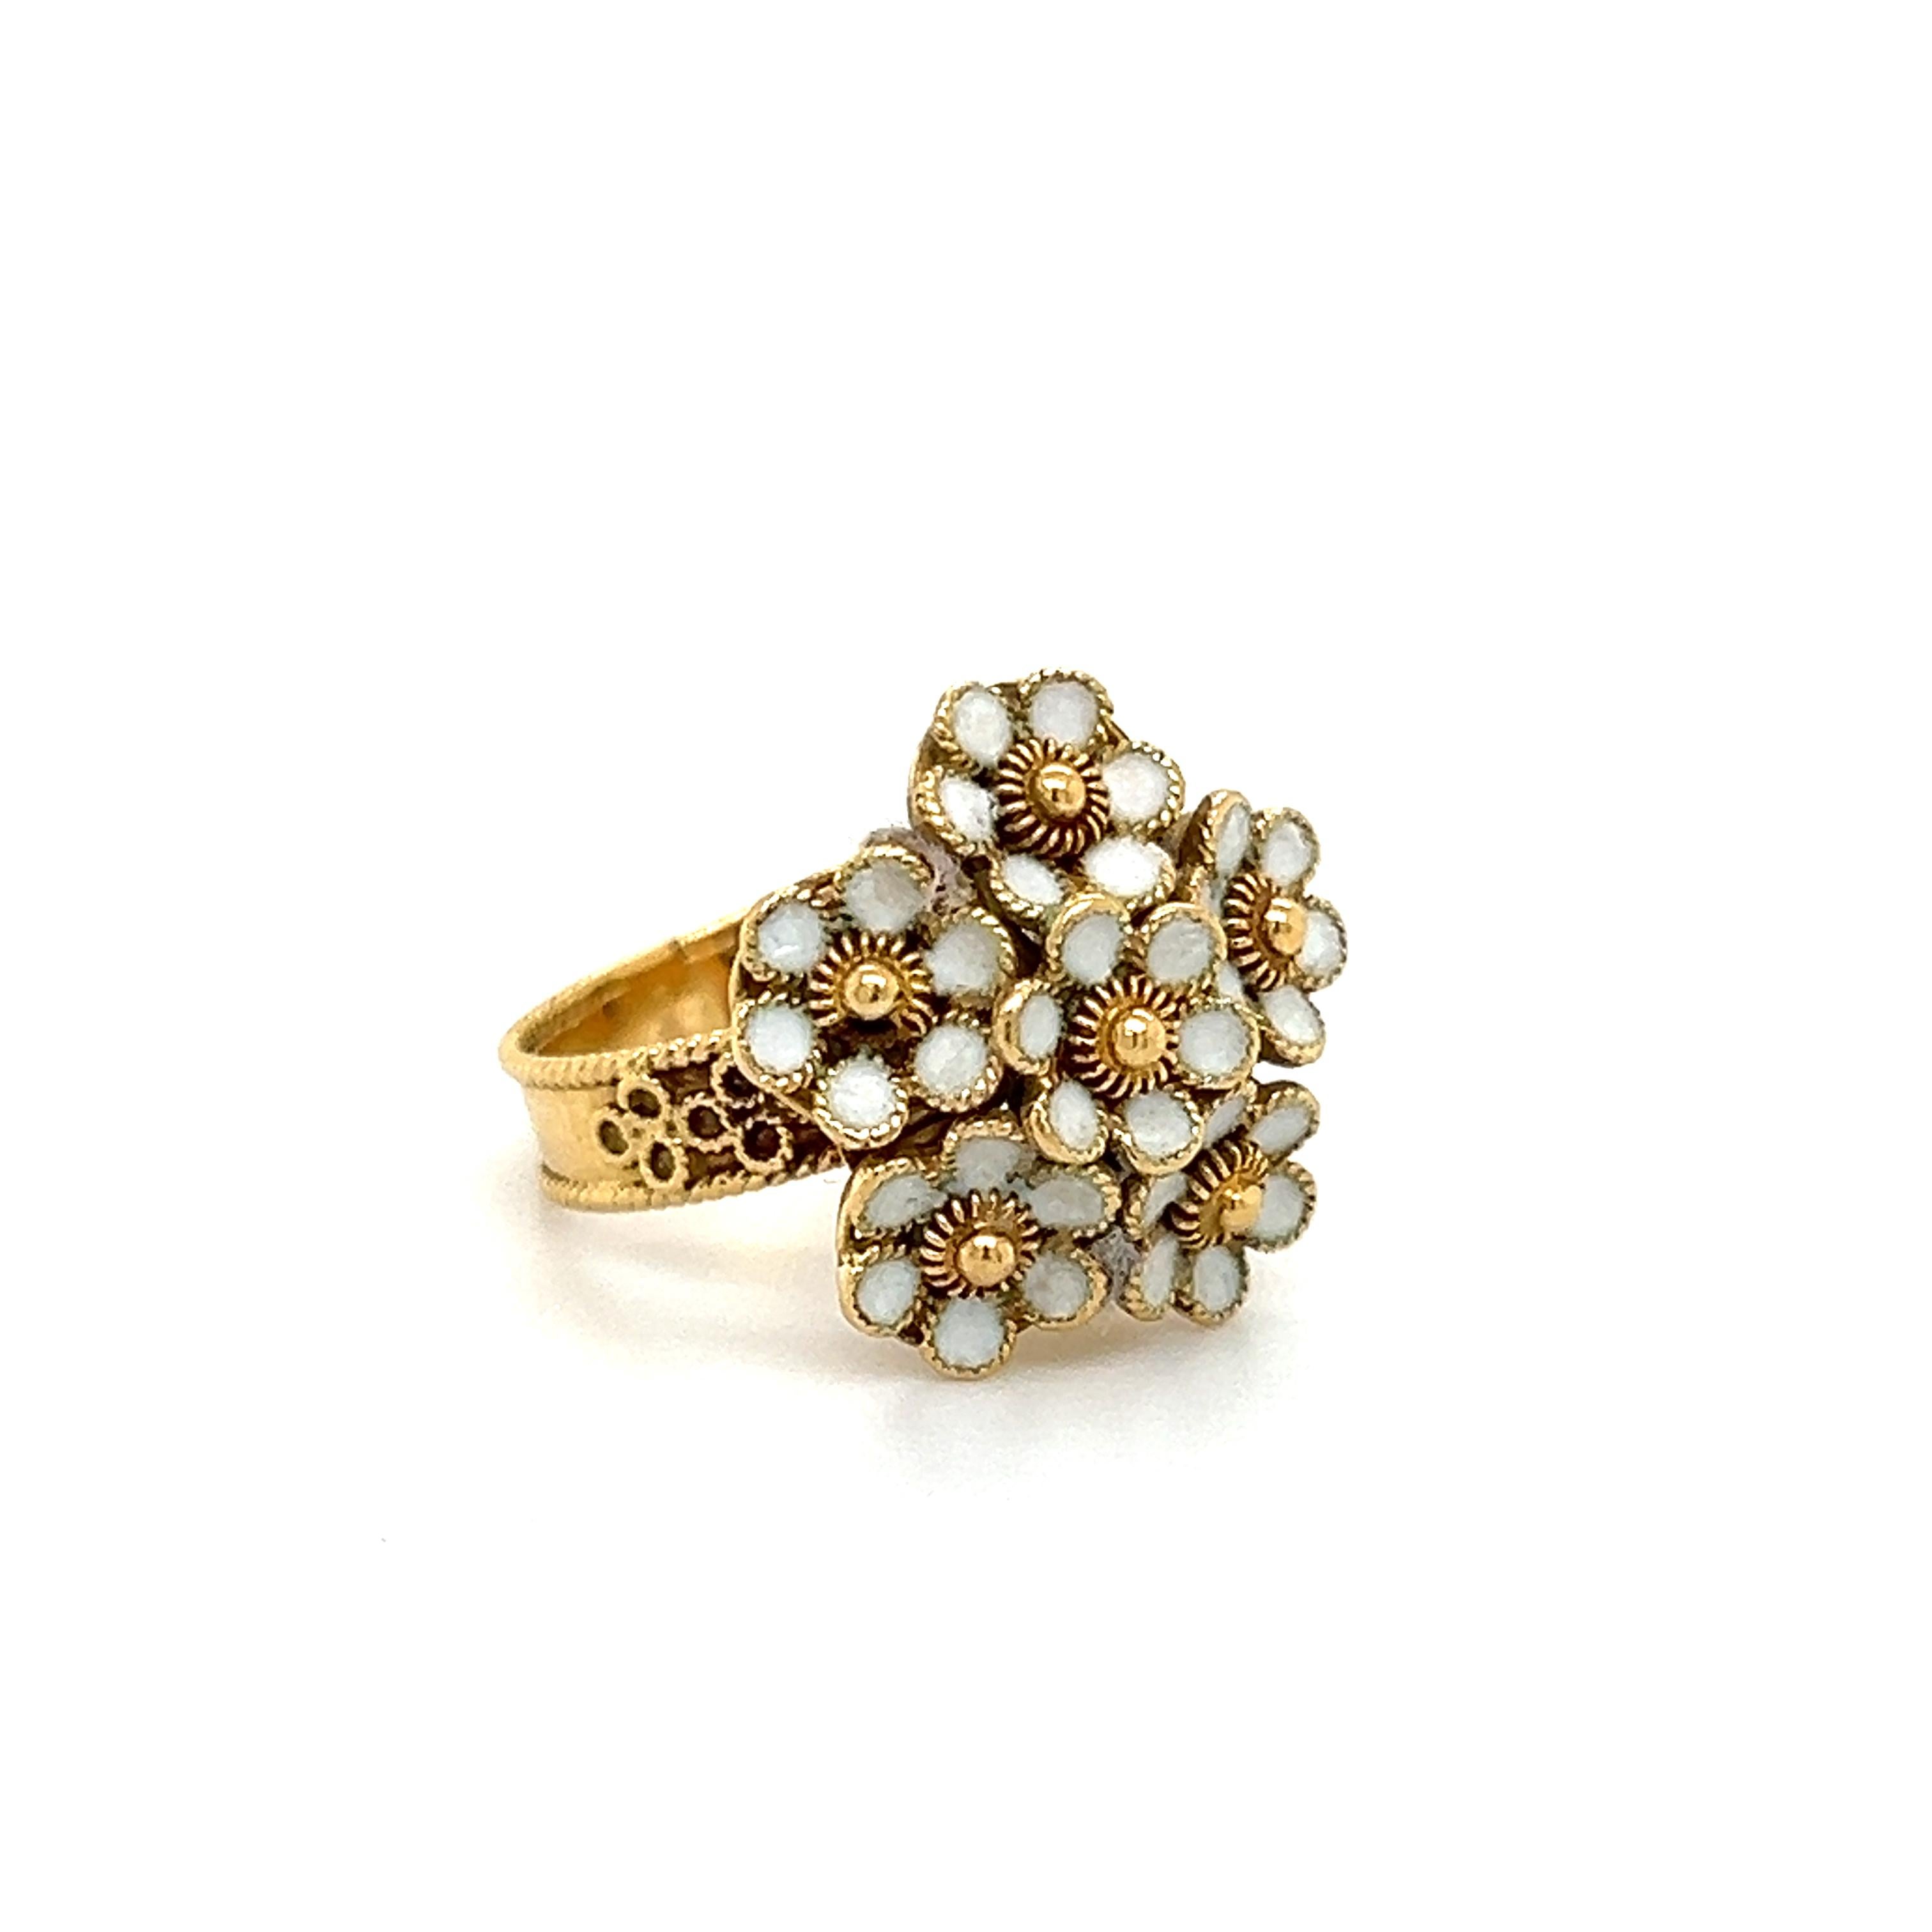 Beautiful ring crafted in 18k yellow gold. This vintage treasure is nearly 120 years old and was made in the Victorian era.
Details are endless as the ring highlights a floral bouquet, with white enamel decorating the petals. The enamel is in